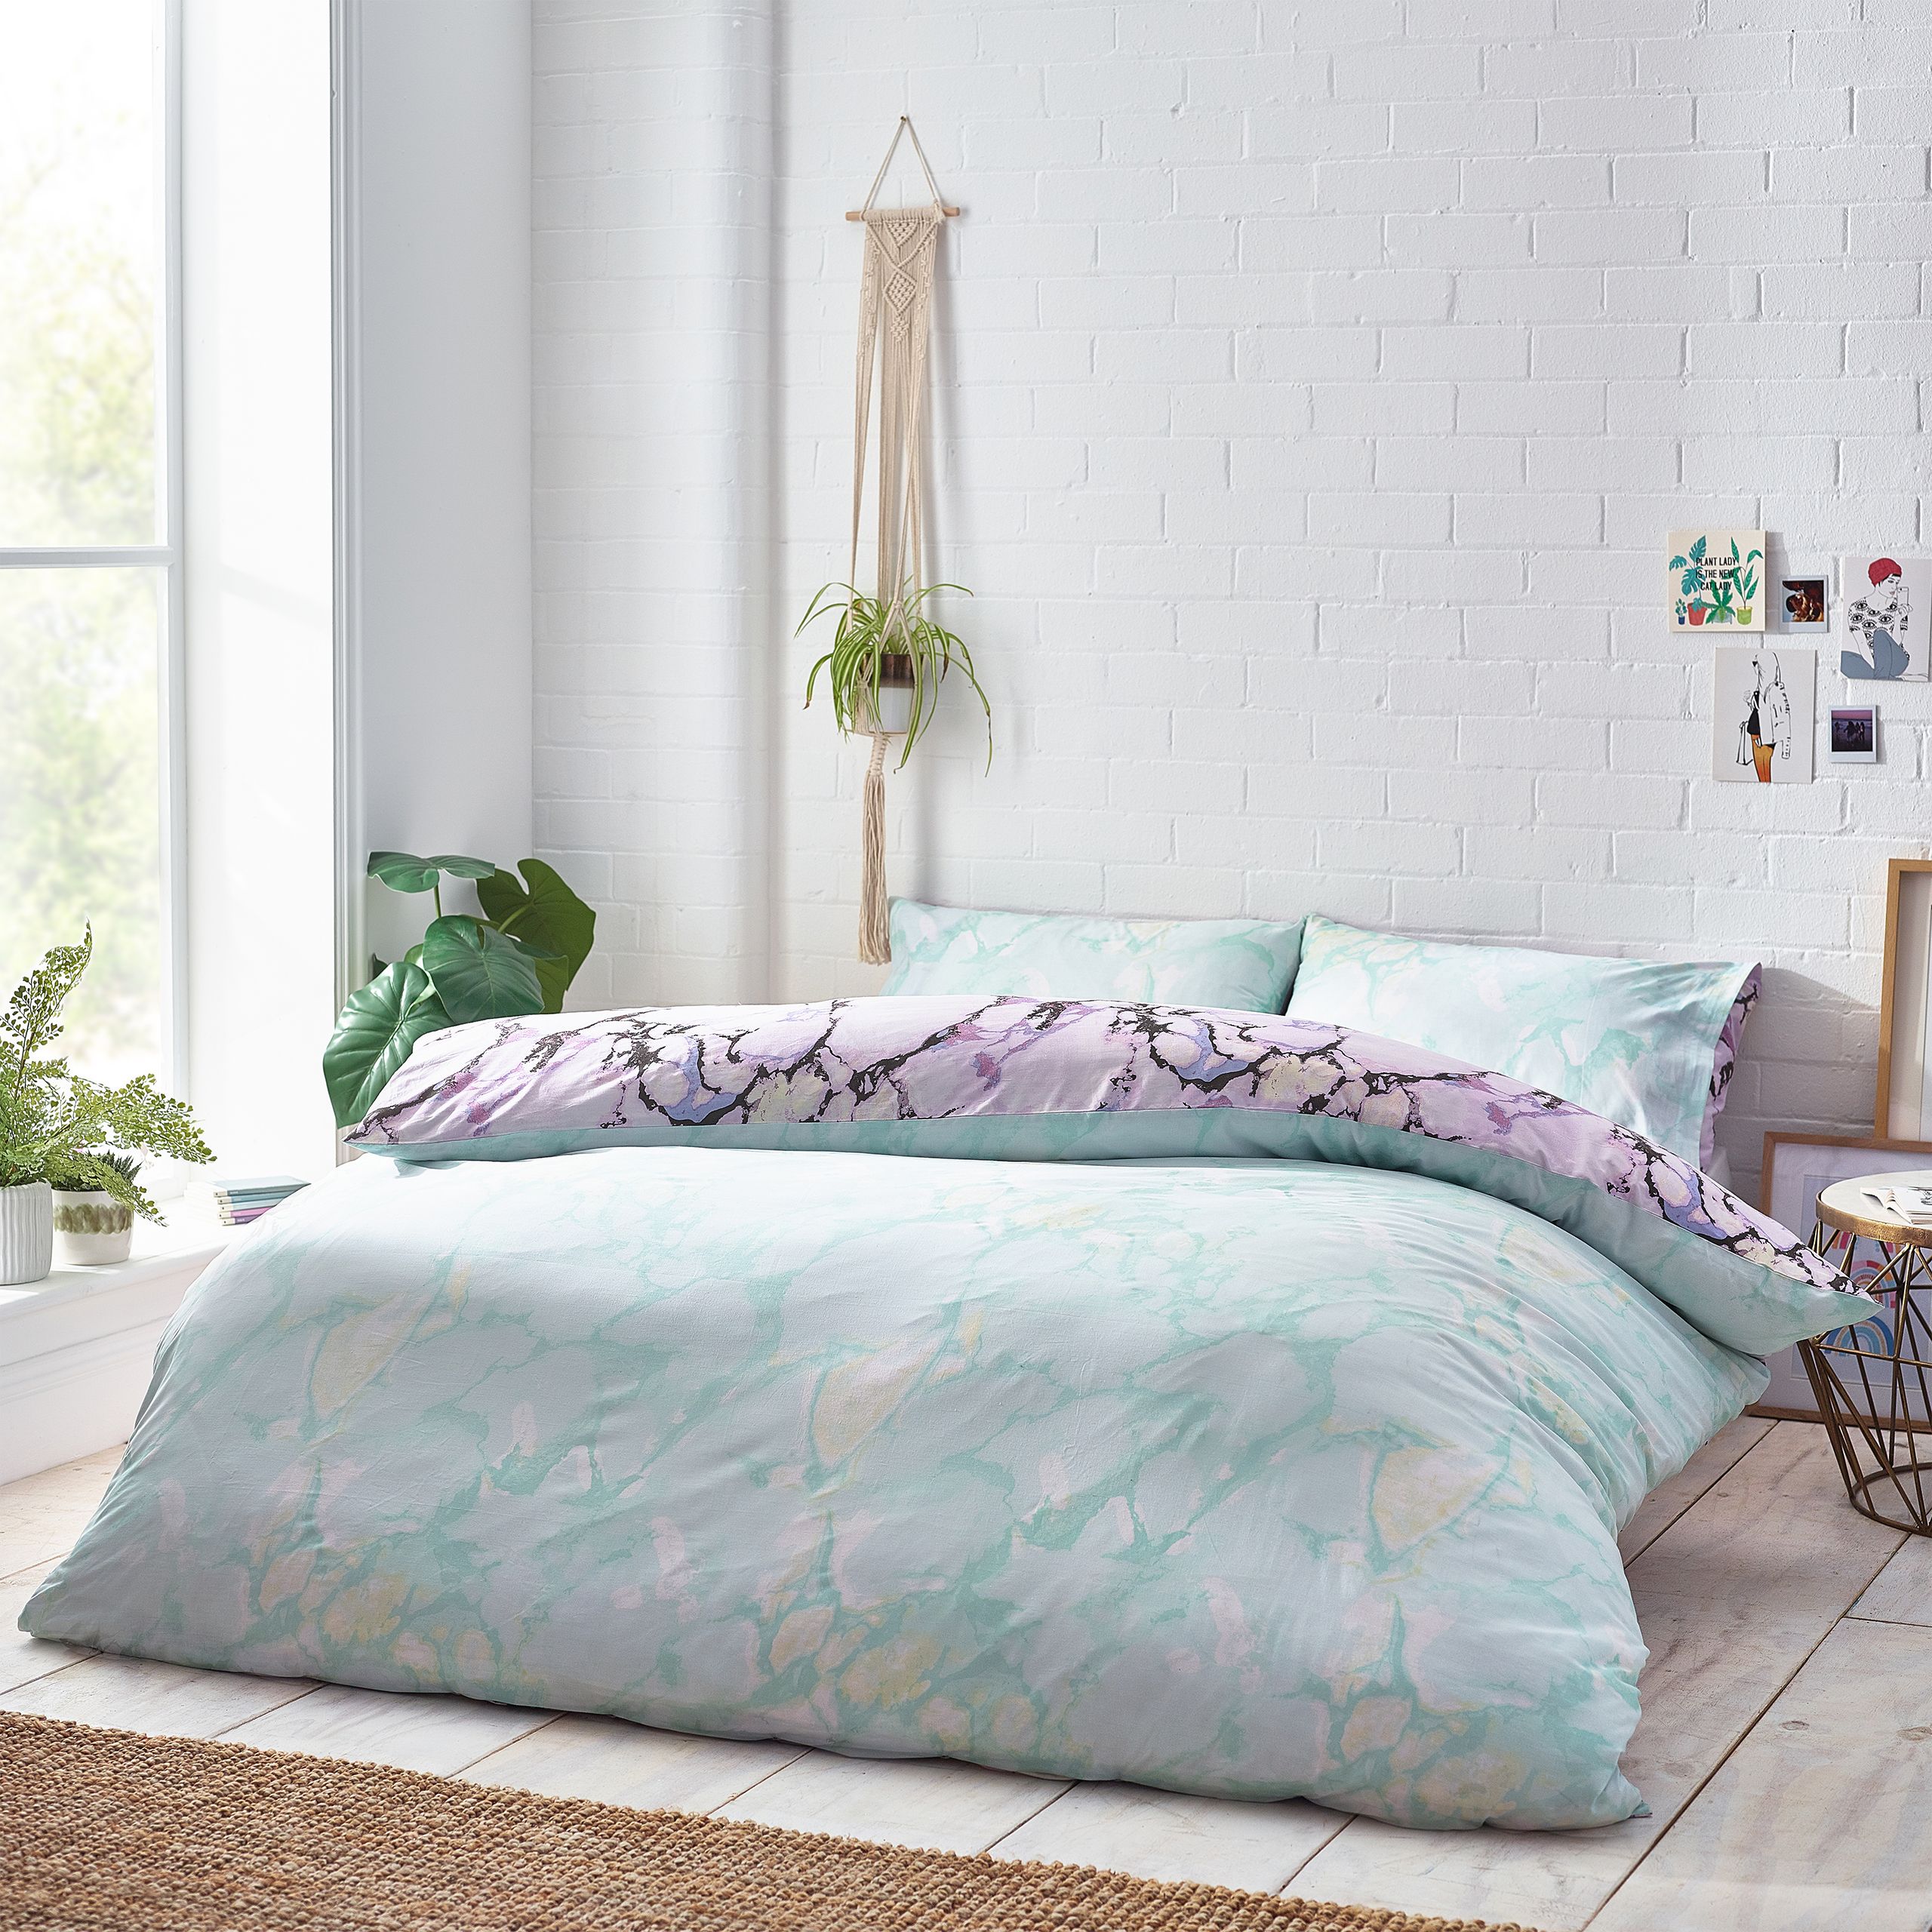 Add instant personality to your bedroom with this Marble duvet set. Featuring a vibrant pastel marble design. The marble design continues to the reverse in a mint green so you can switch the look when you need to.